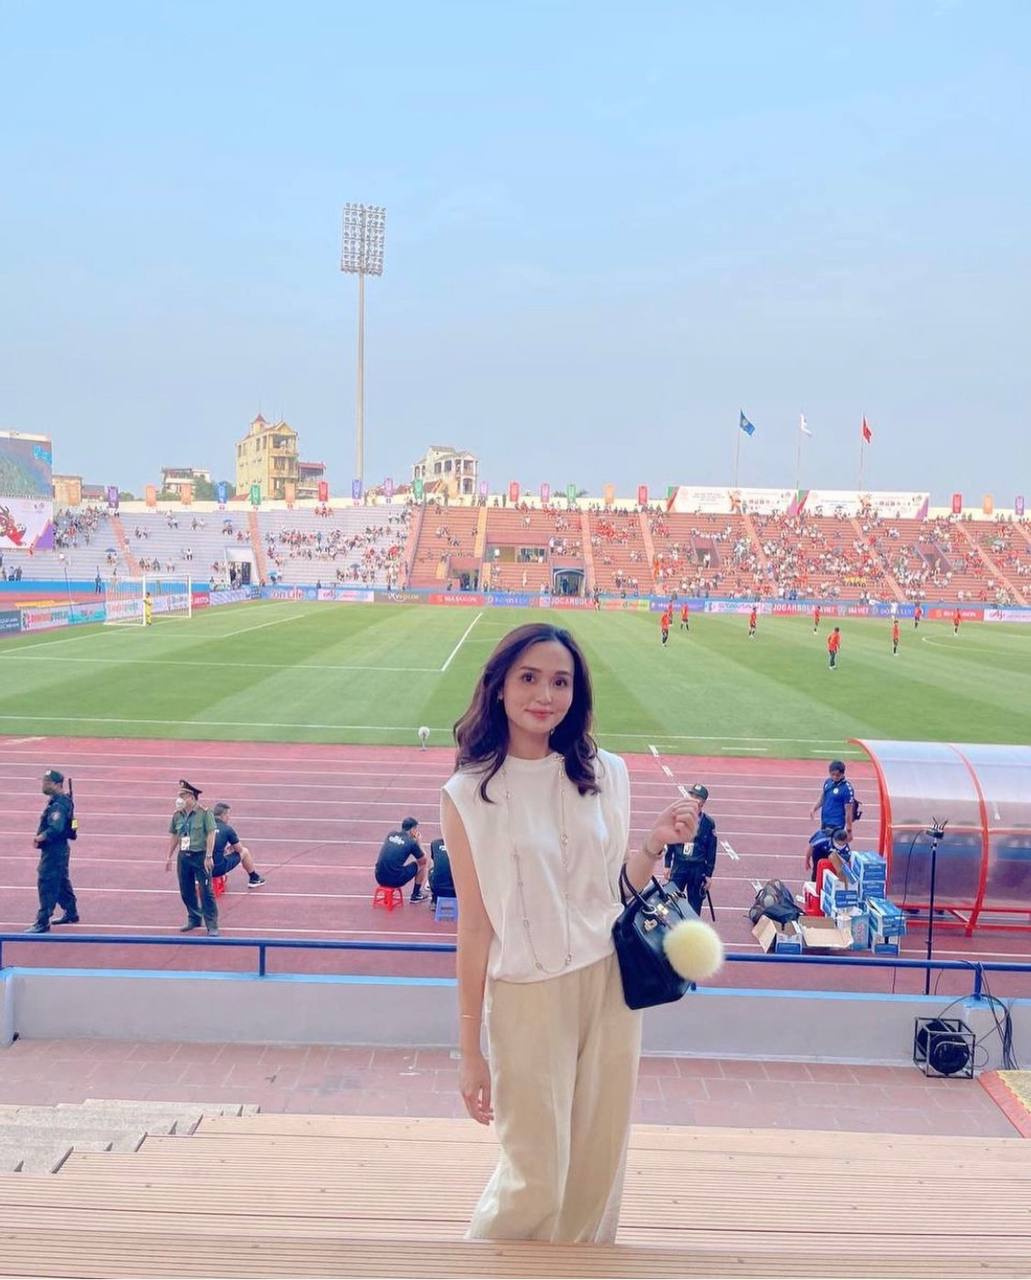 The daughter of the former President of Saigon Club and her son checked-in to Viet Tri Stadium very early, cheering U23 to debut at the 31st SEA Games - Photo 1.